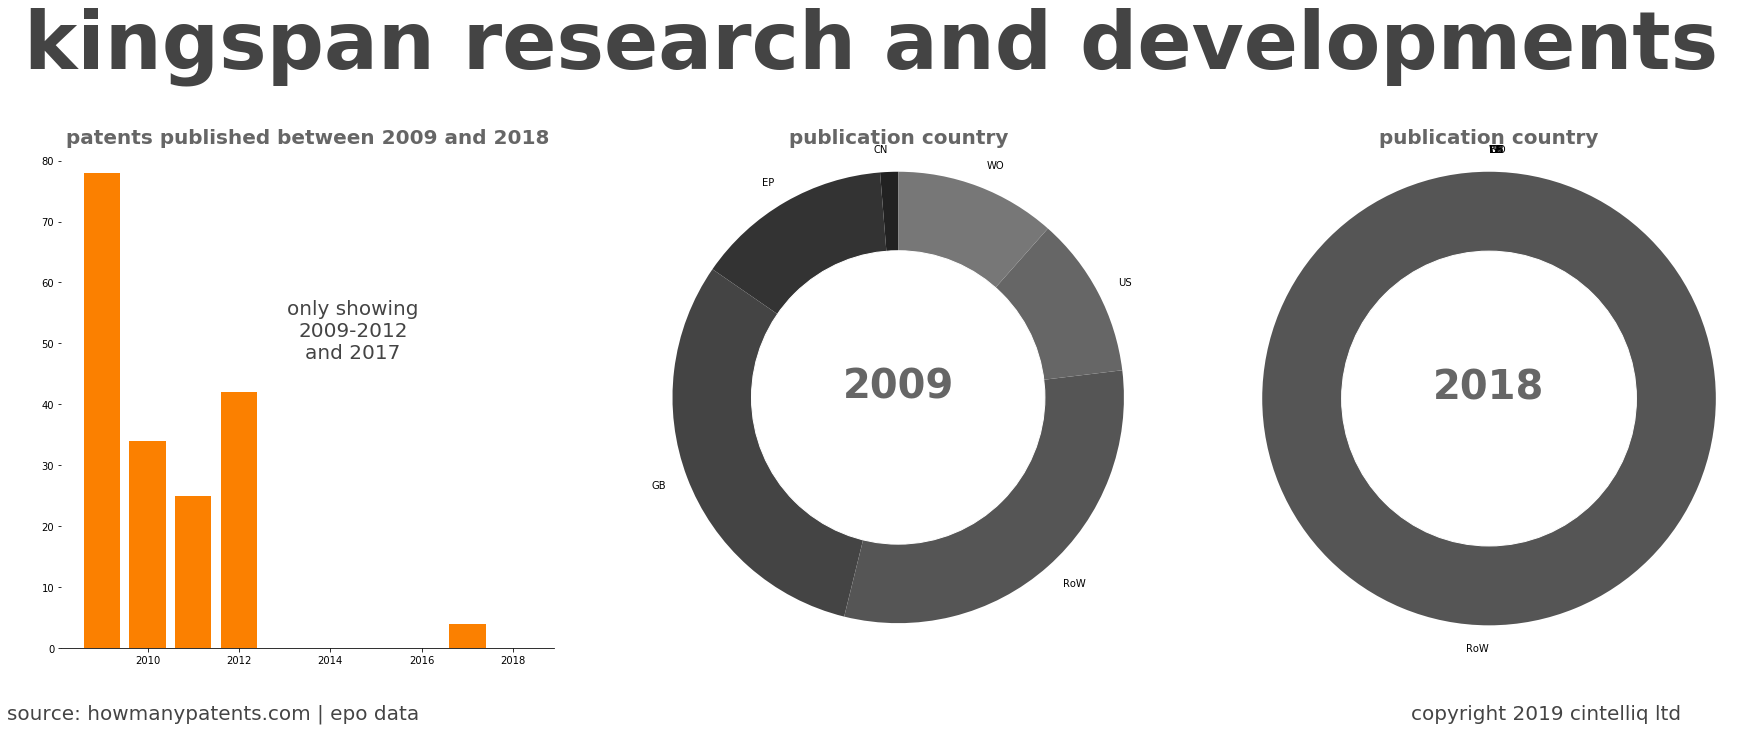 summary of patents for Kingspan Research And Developments